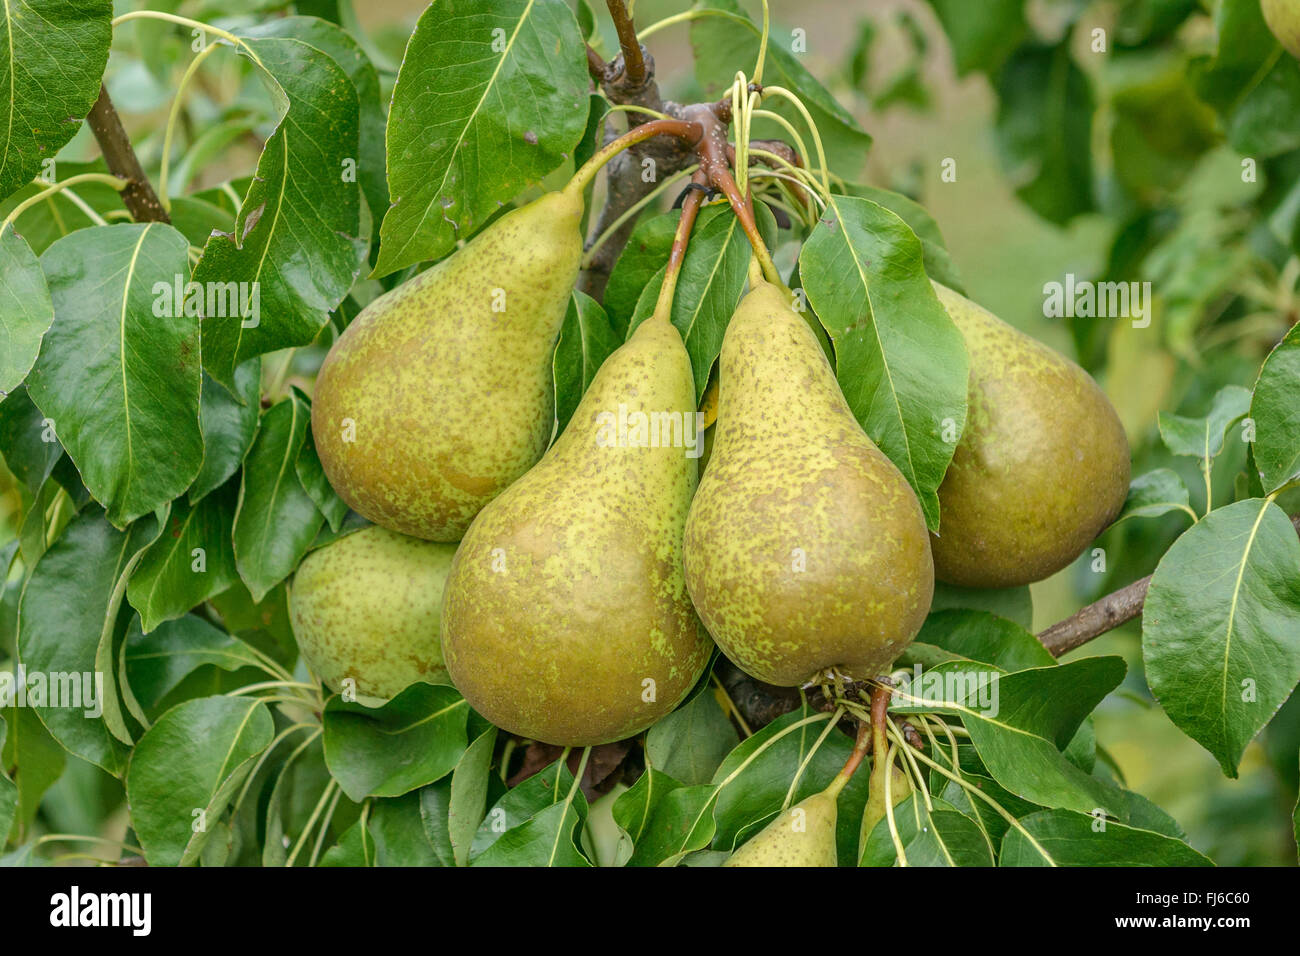 Common pear (Pyrus communis 'Conference', Pyrus communis Conference), pears on a tree, cultivar Conference, Germany Stock Photo